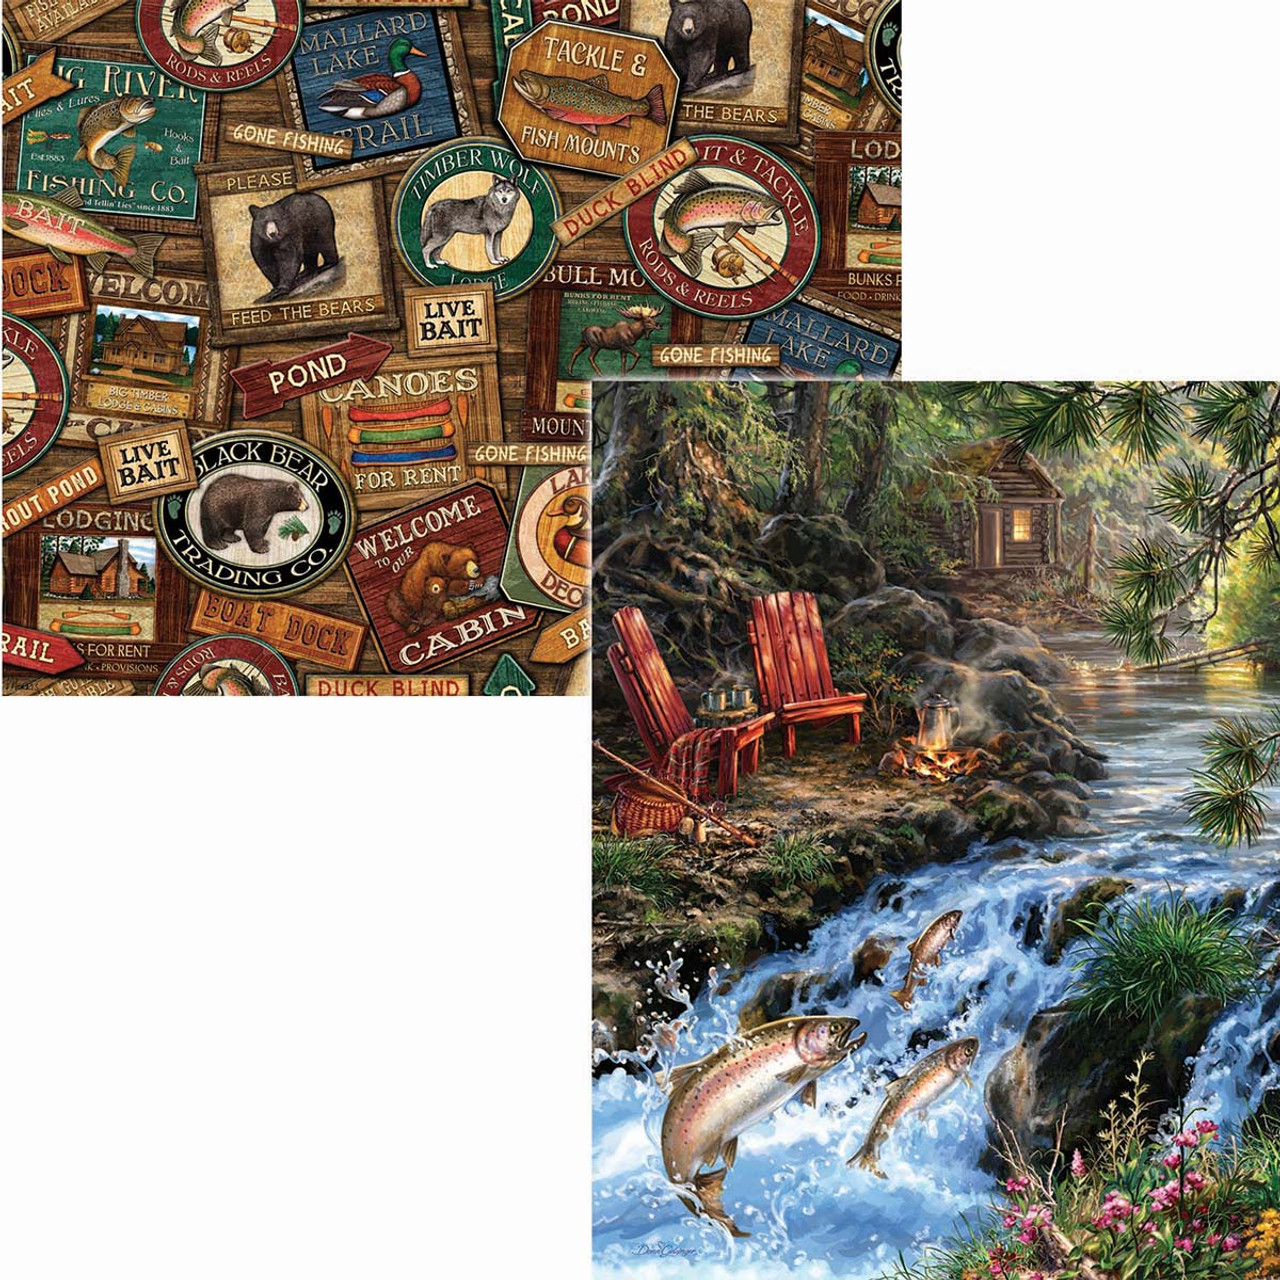 COBBLE HILL 1000 Piece Puzzle (Fishing Lures)